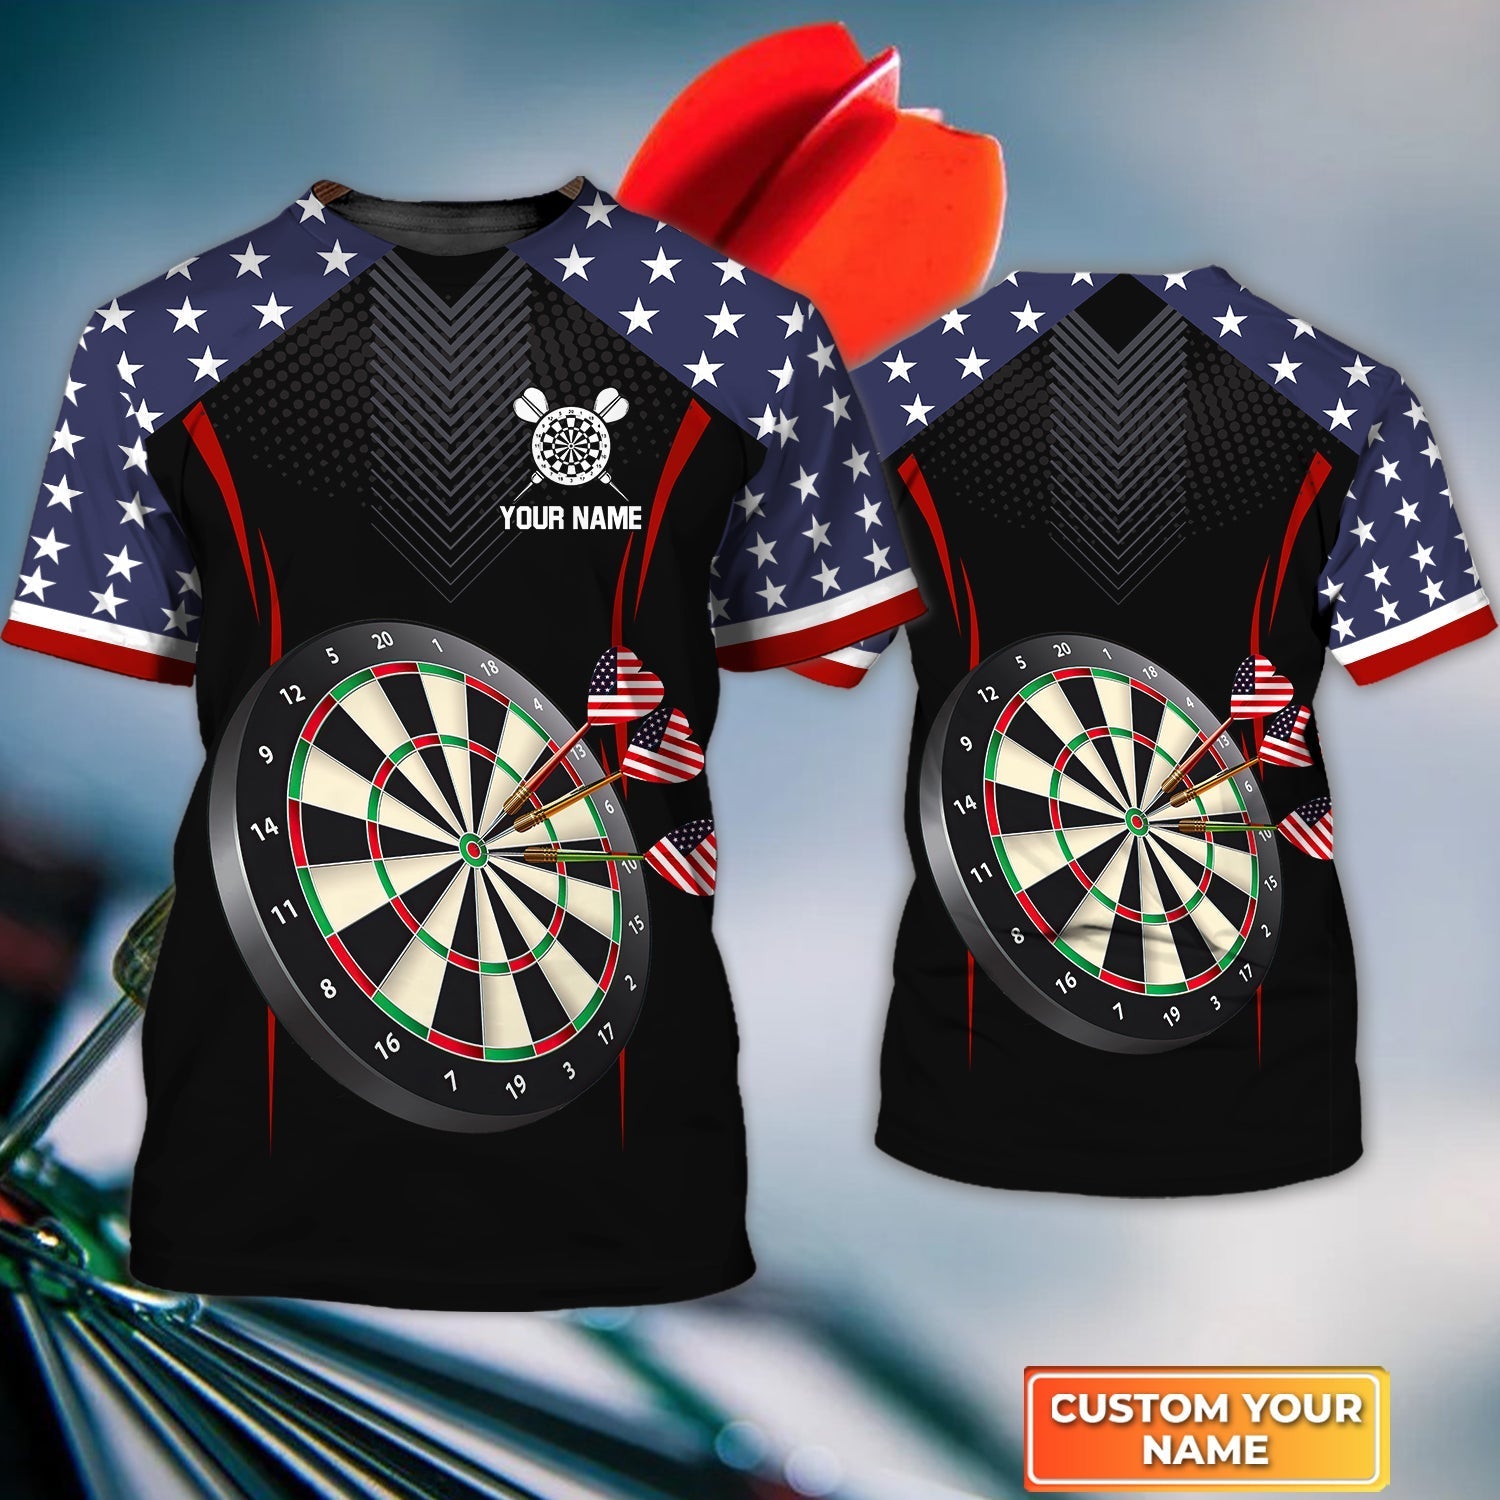 USA Darts shirt, Personalized Name 3D Tshirt for men, Gift For Darts Player – DT099